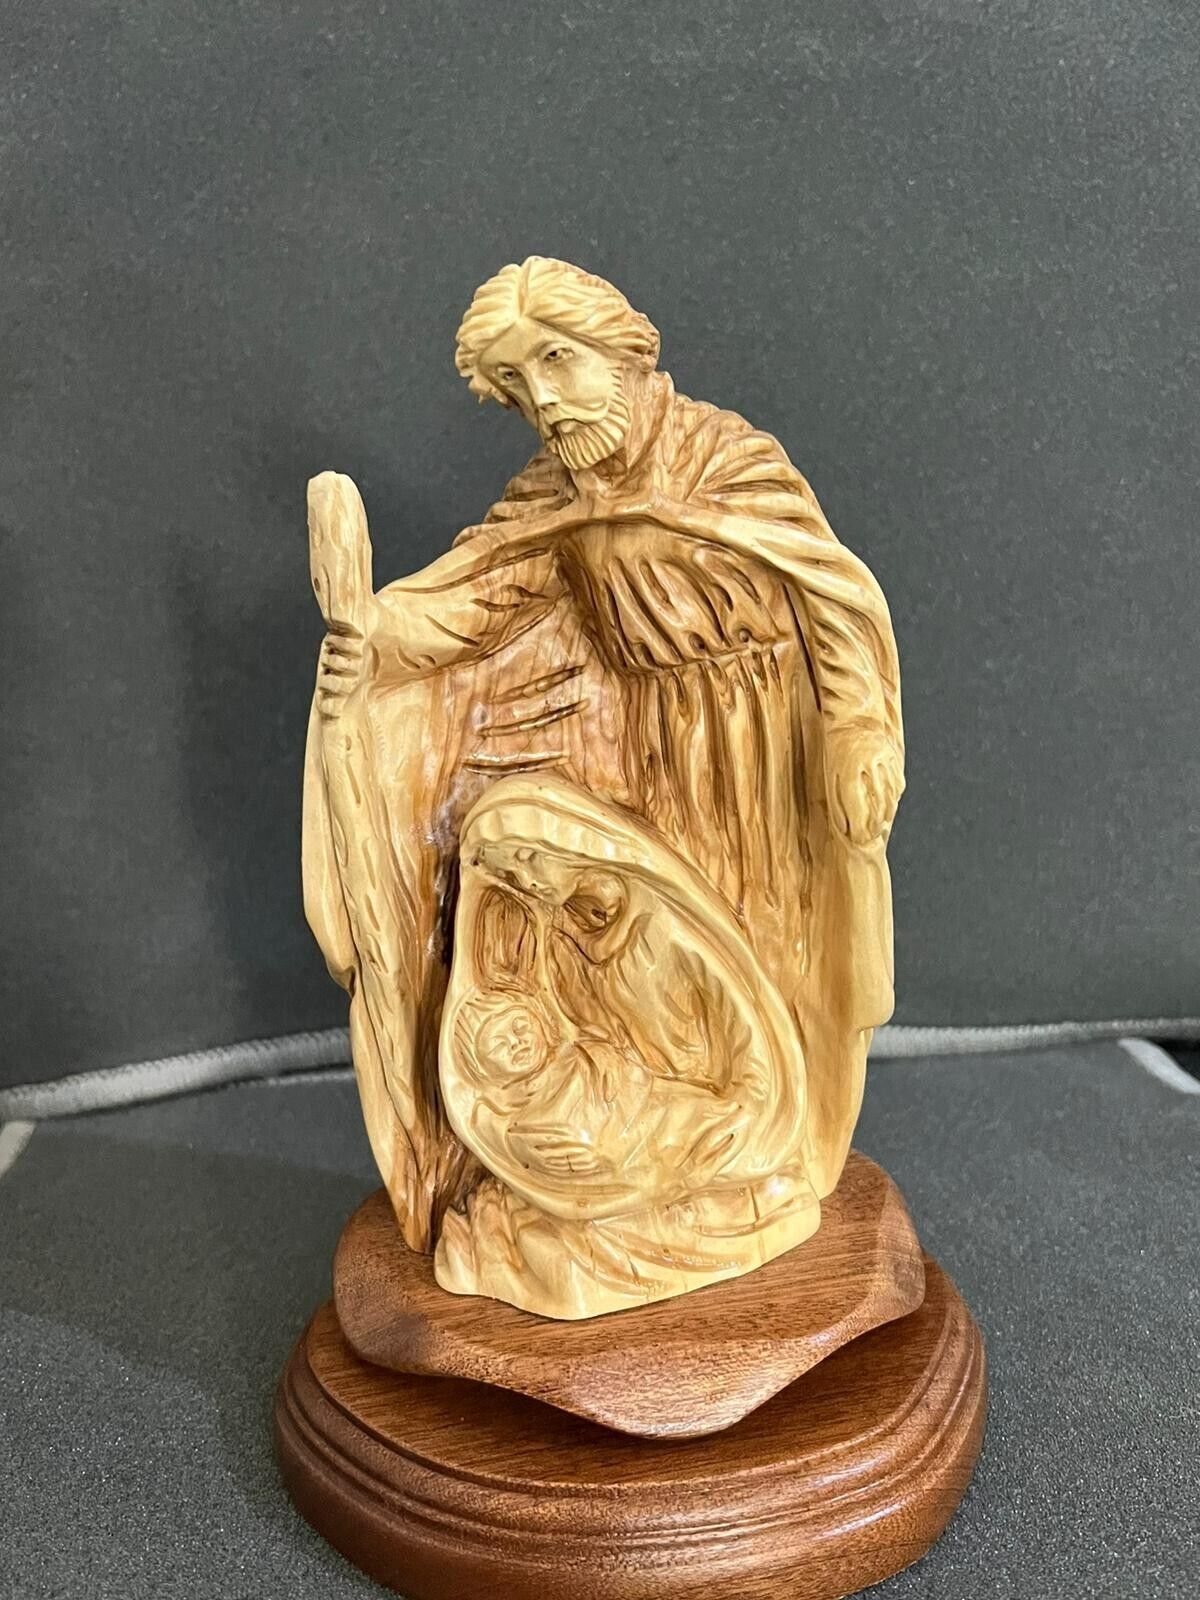 Beautifully Handcrafted Olive Wood Holy Family Statue From Holy Land Bethlehem